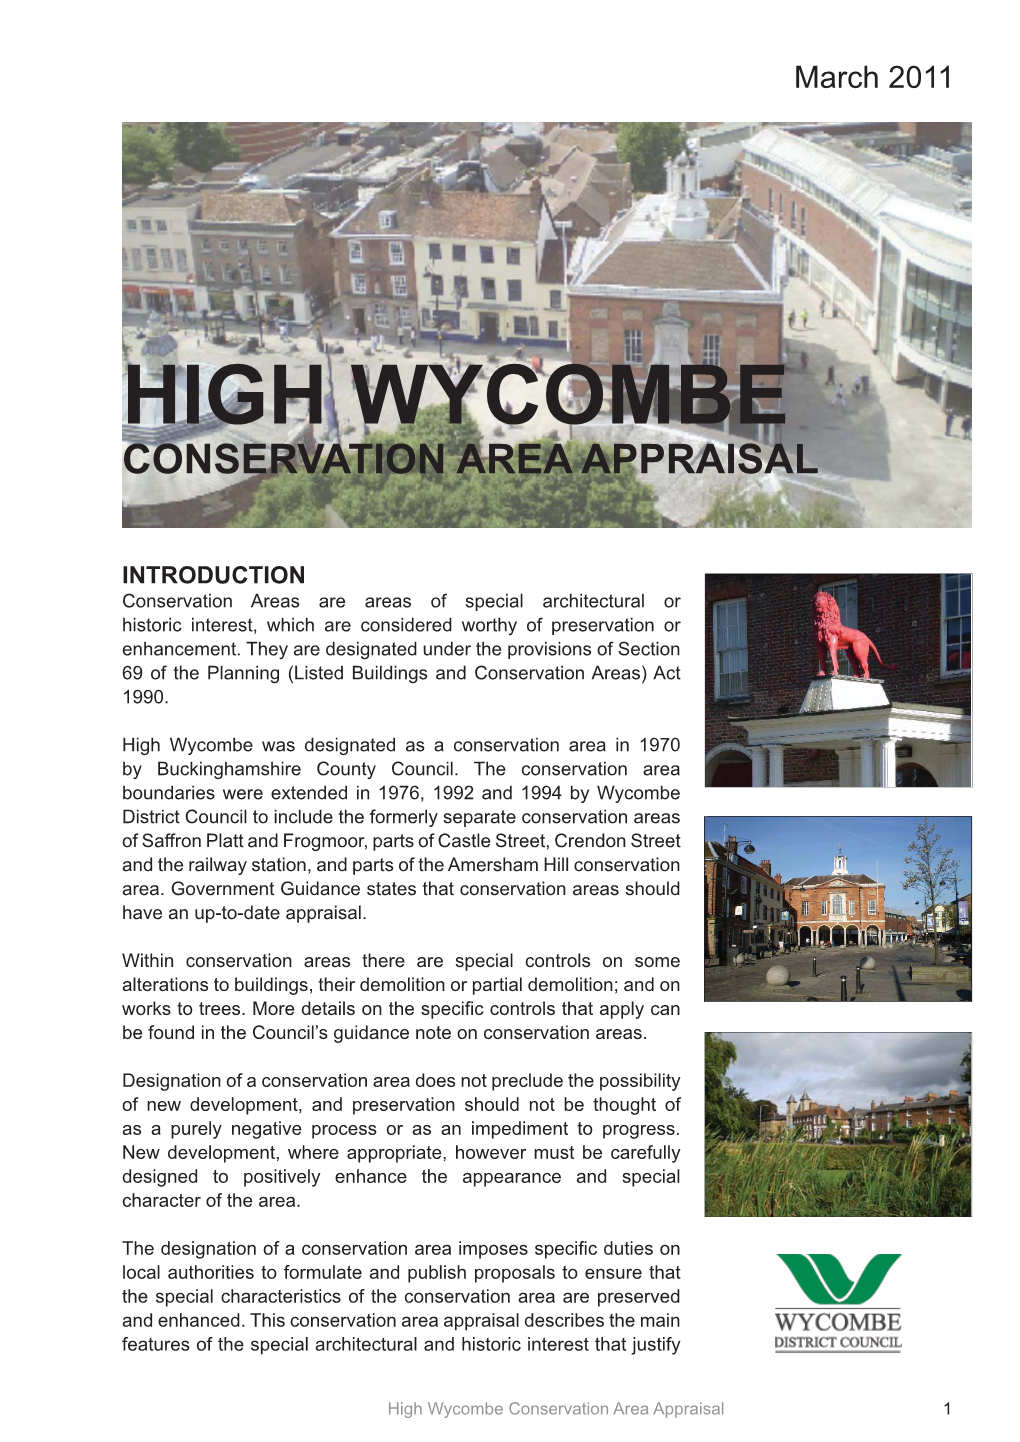 High Wycombe Conservation Area Appraisal Introduction